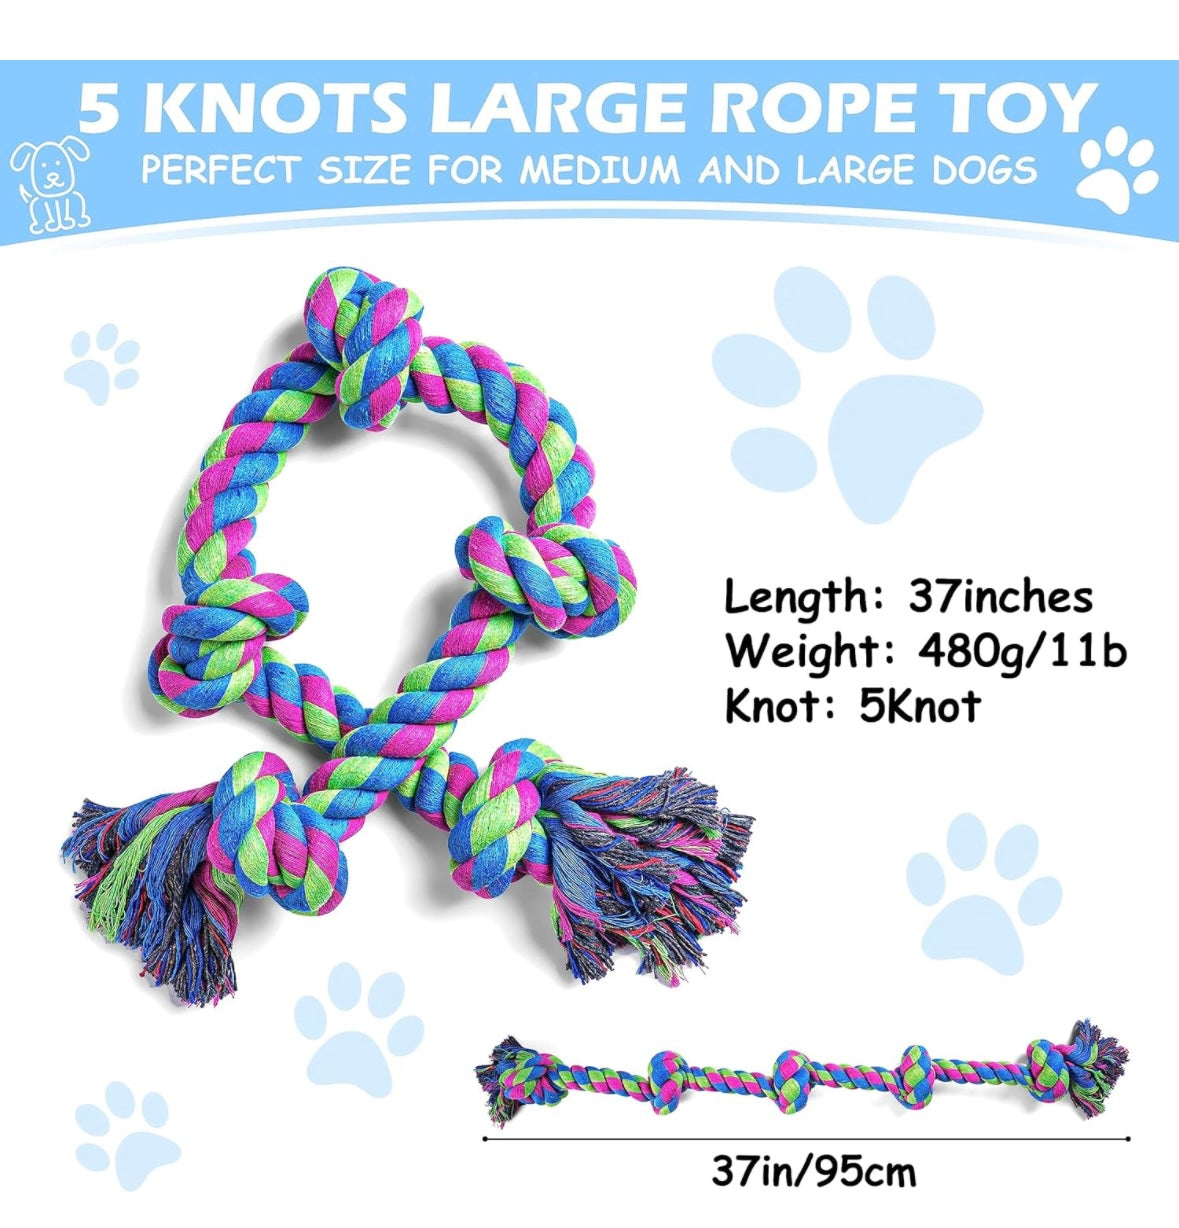 Large rope dog toy - create hours of tug of war fun with your dog